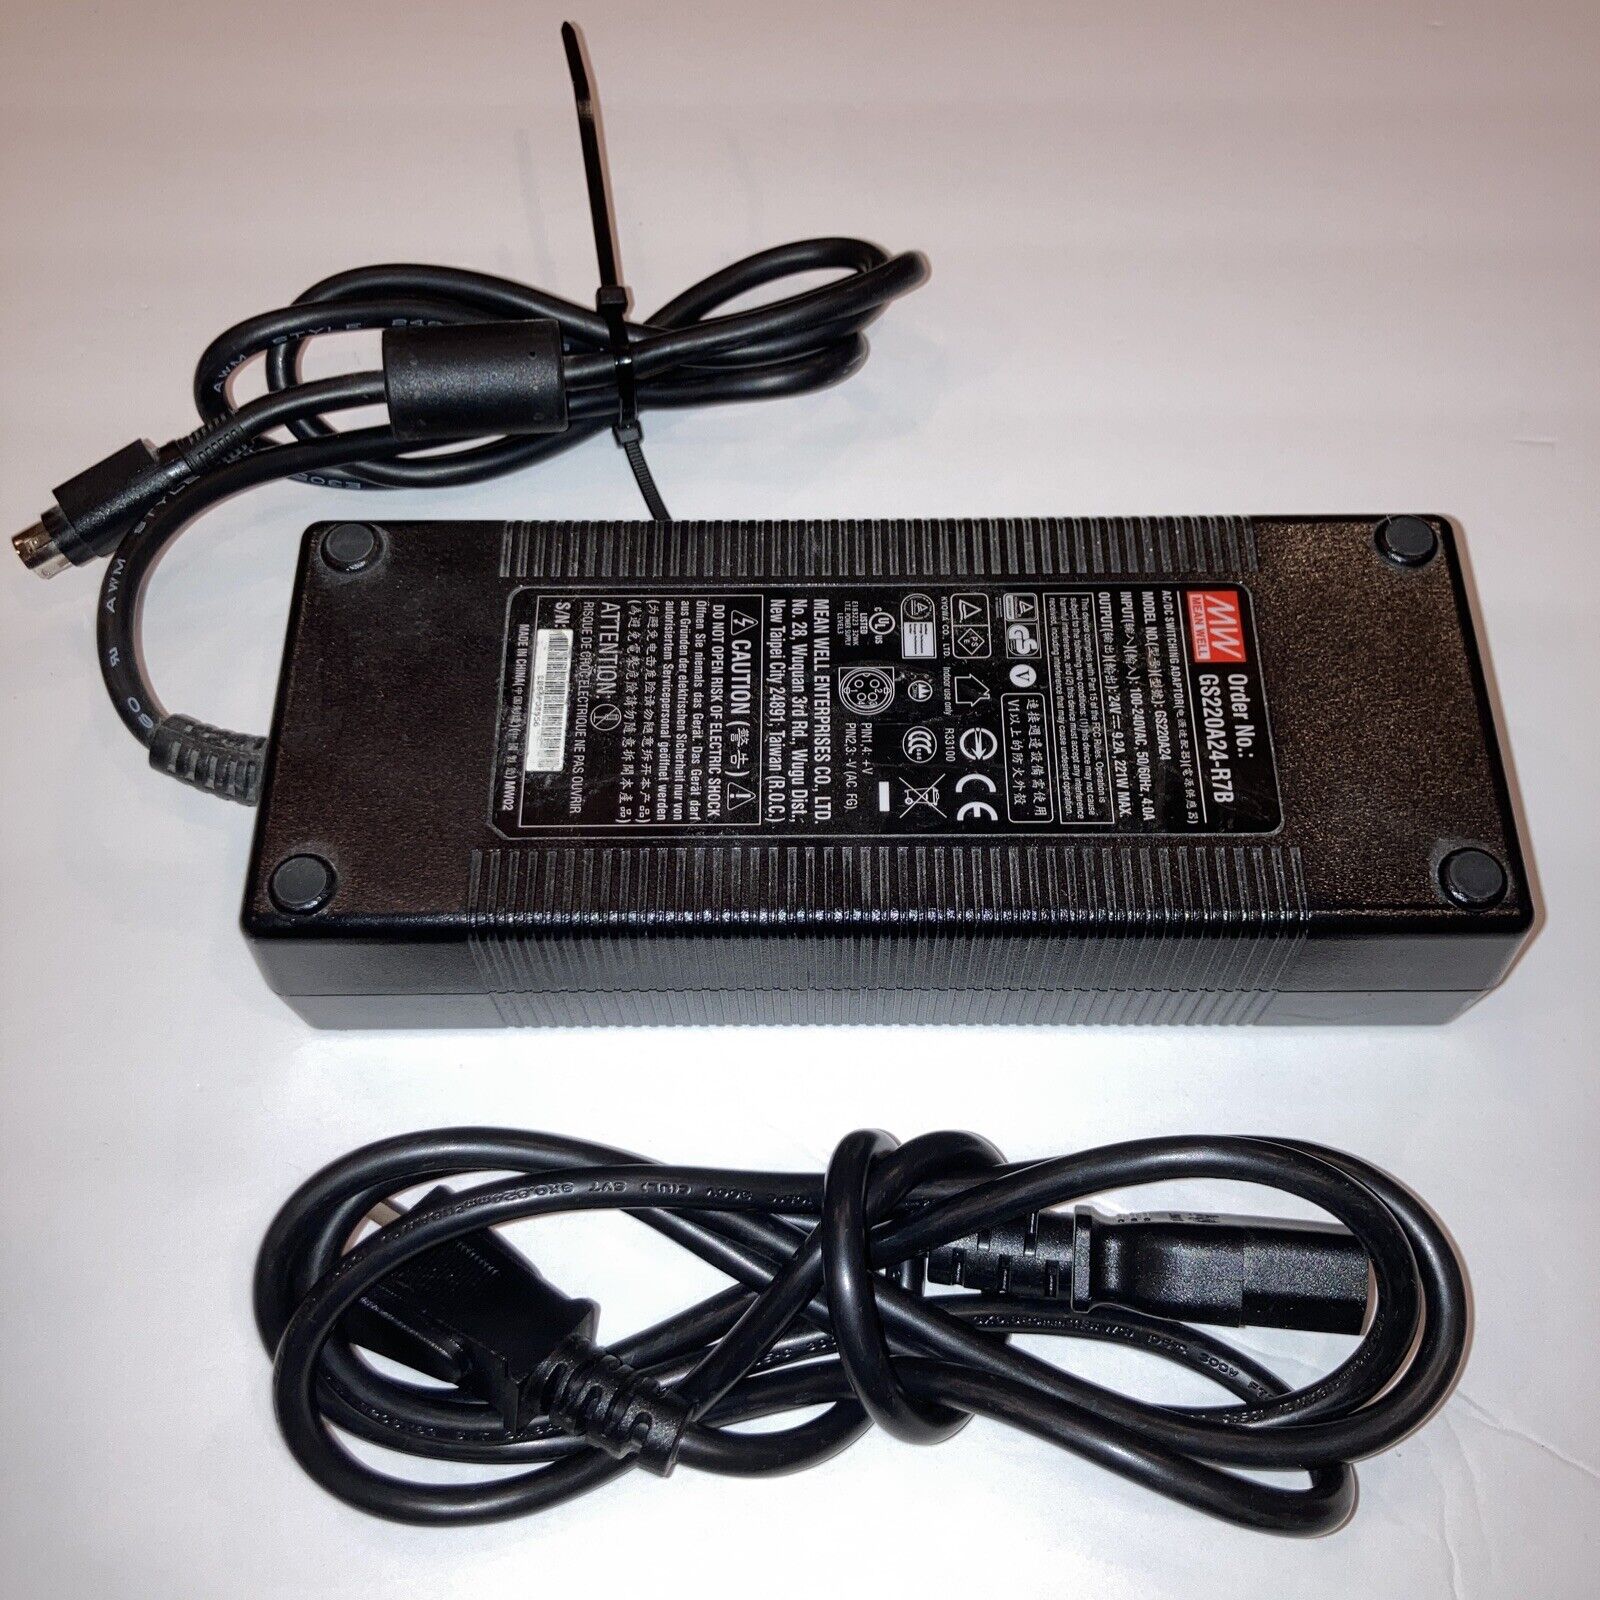 Mean Well Power Supply GS220A24-R7B 24V 9.2A for Ultimaker 2, Works Great Brand: Mean Well Type: Power Supply Col